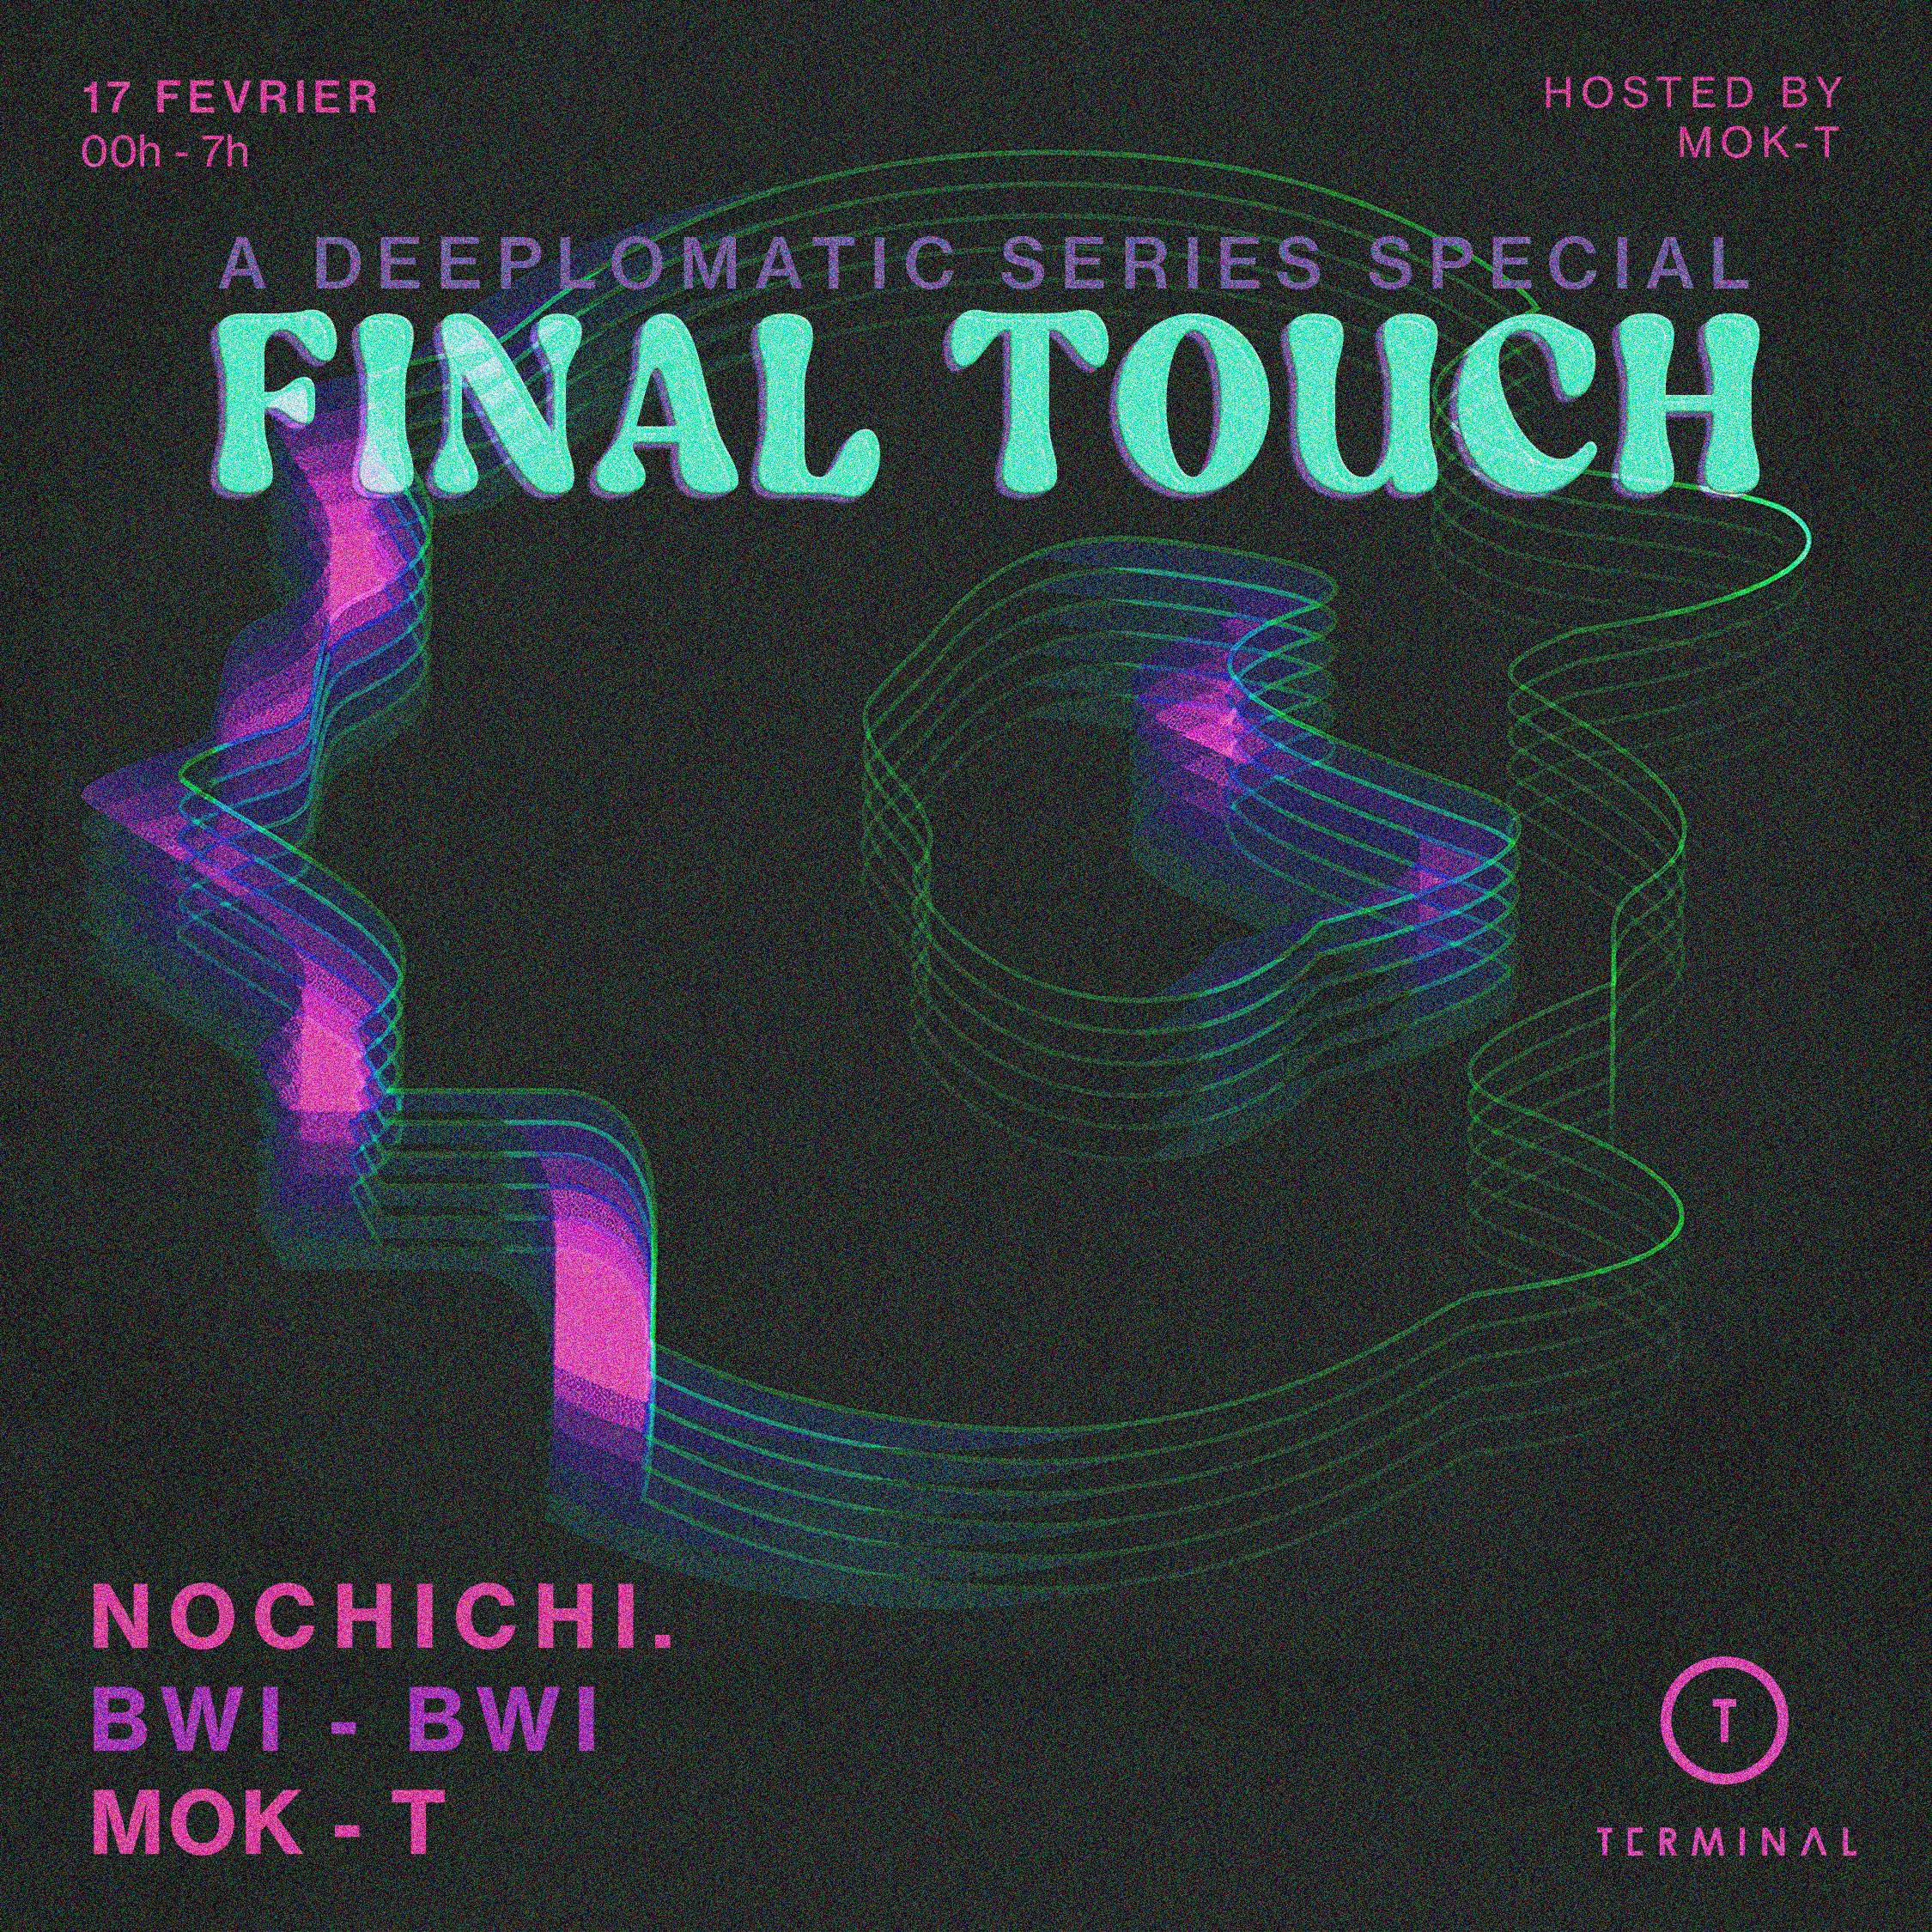 FINAL TOUCH (A Deeplomatic Series Special) with nochichi., Bwi-Bwi, Mok-T - Página frontal